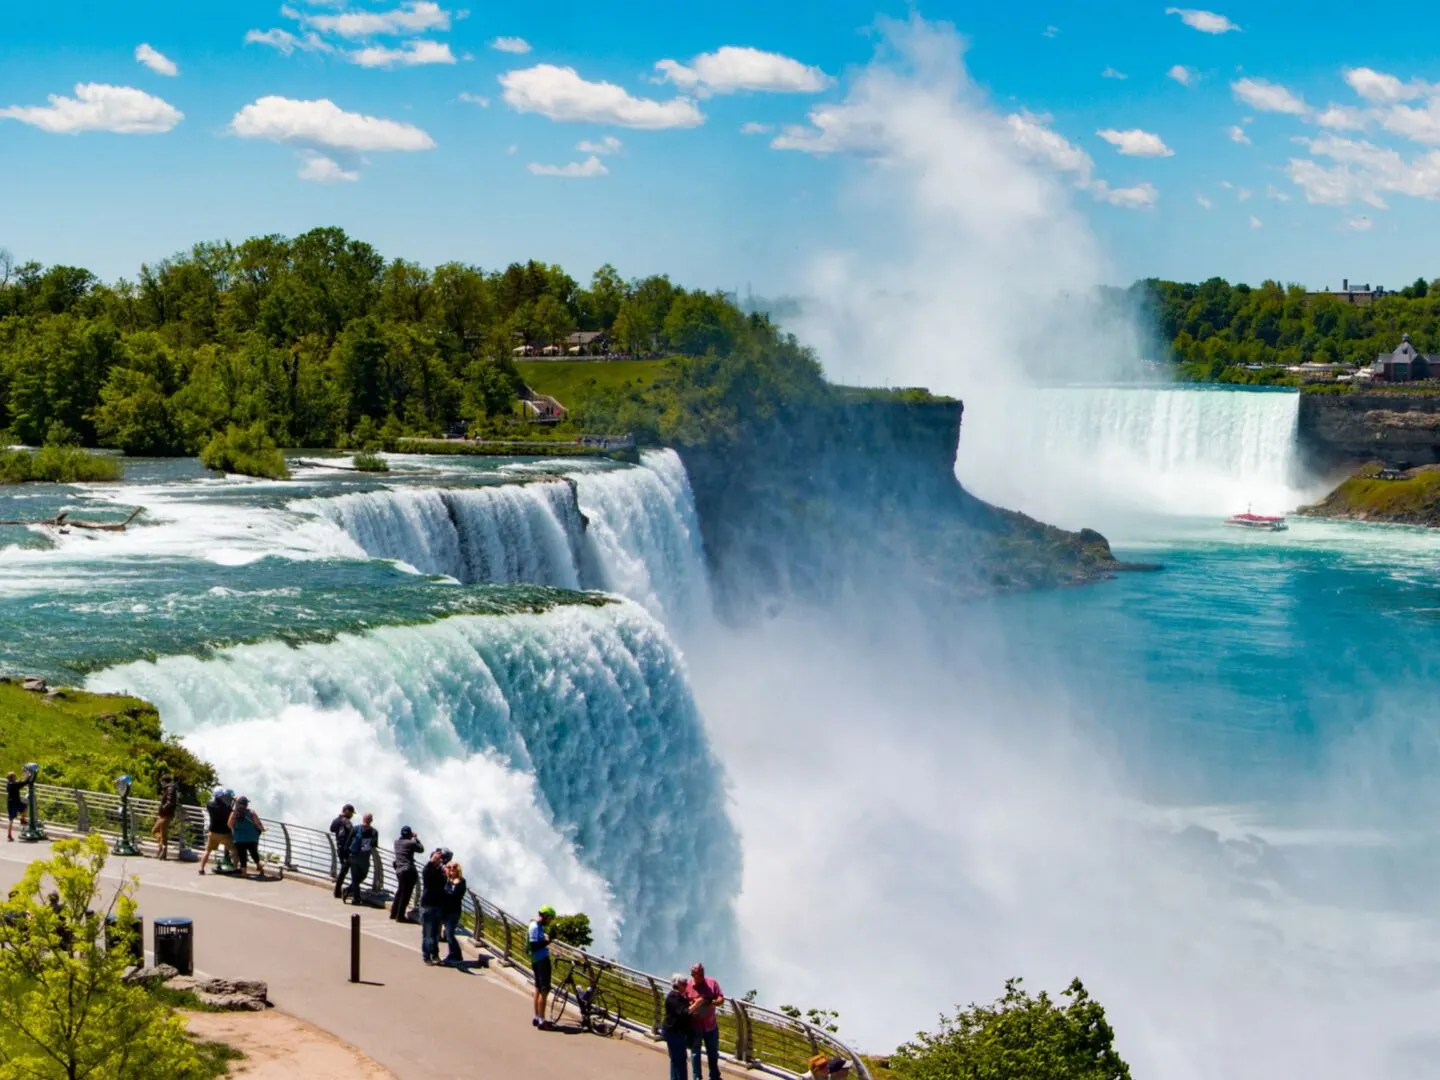 Planning a trip to Niagara Falls, Canada soon? You won't want to miss this guide of incredible things to do in Niagara Falls! From amazing restaurants, to the butterfly conservatory, bowling, and even a speedway... There is so much more to do here than just the falls themselves. Click for the full guide! Pictured here: The Niagara Falls in One Day Deluxe Sightseeing Tour